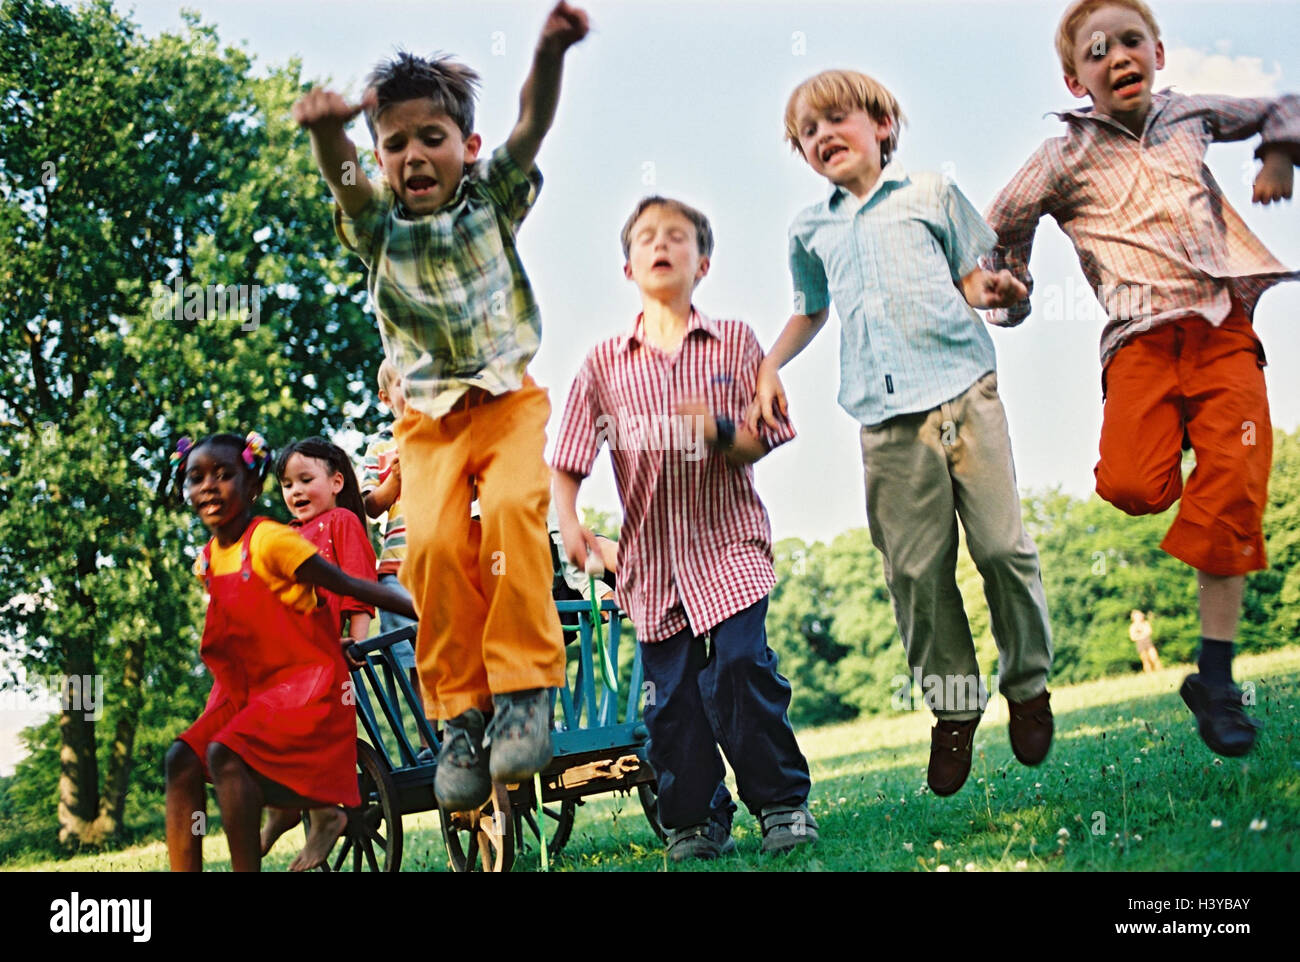 Children, group, skin colour differently, handcarts, game, fun, caper, summer, outside youth, childhood, friends, friendship, boy, girl, nationality, passed away, difference, leisure time, amusement, happy, melted, lighthearted, carriages, conductor carri Stock Photo